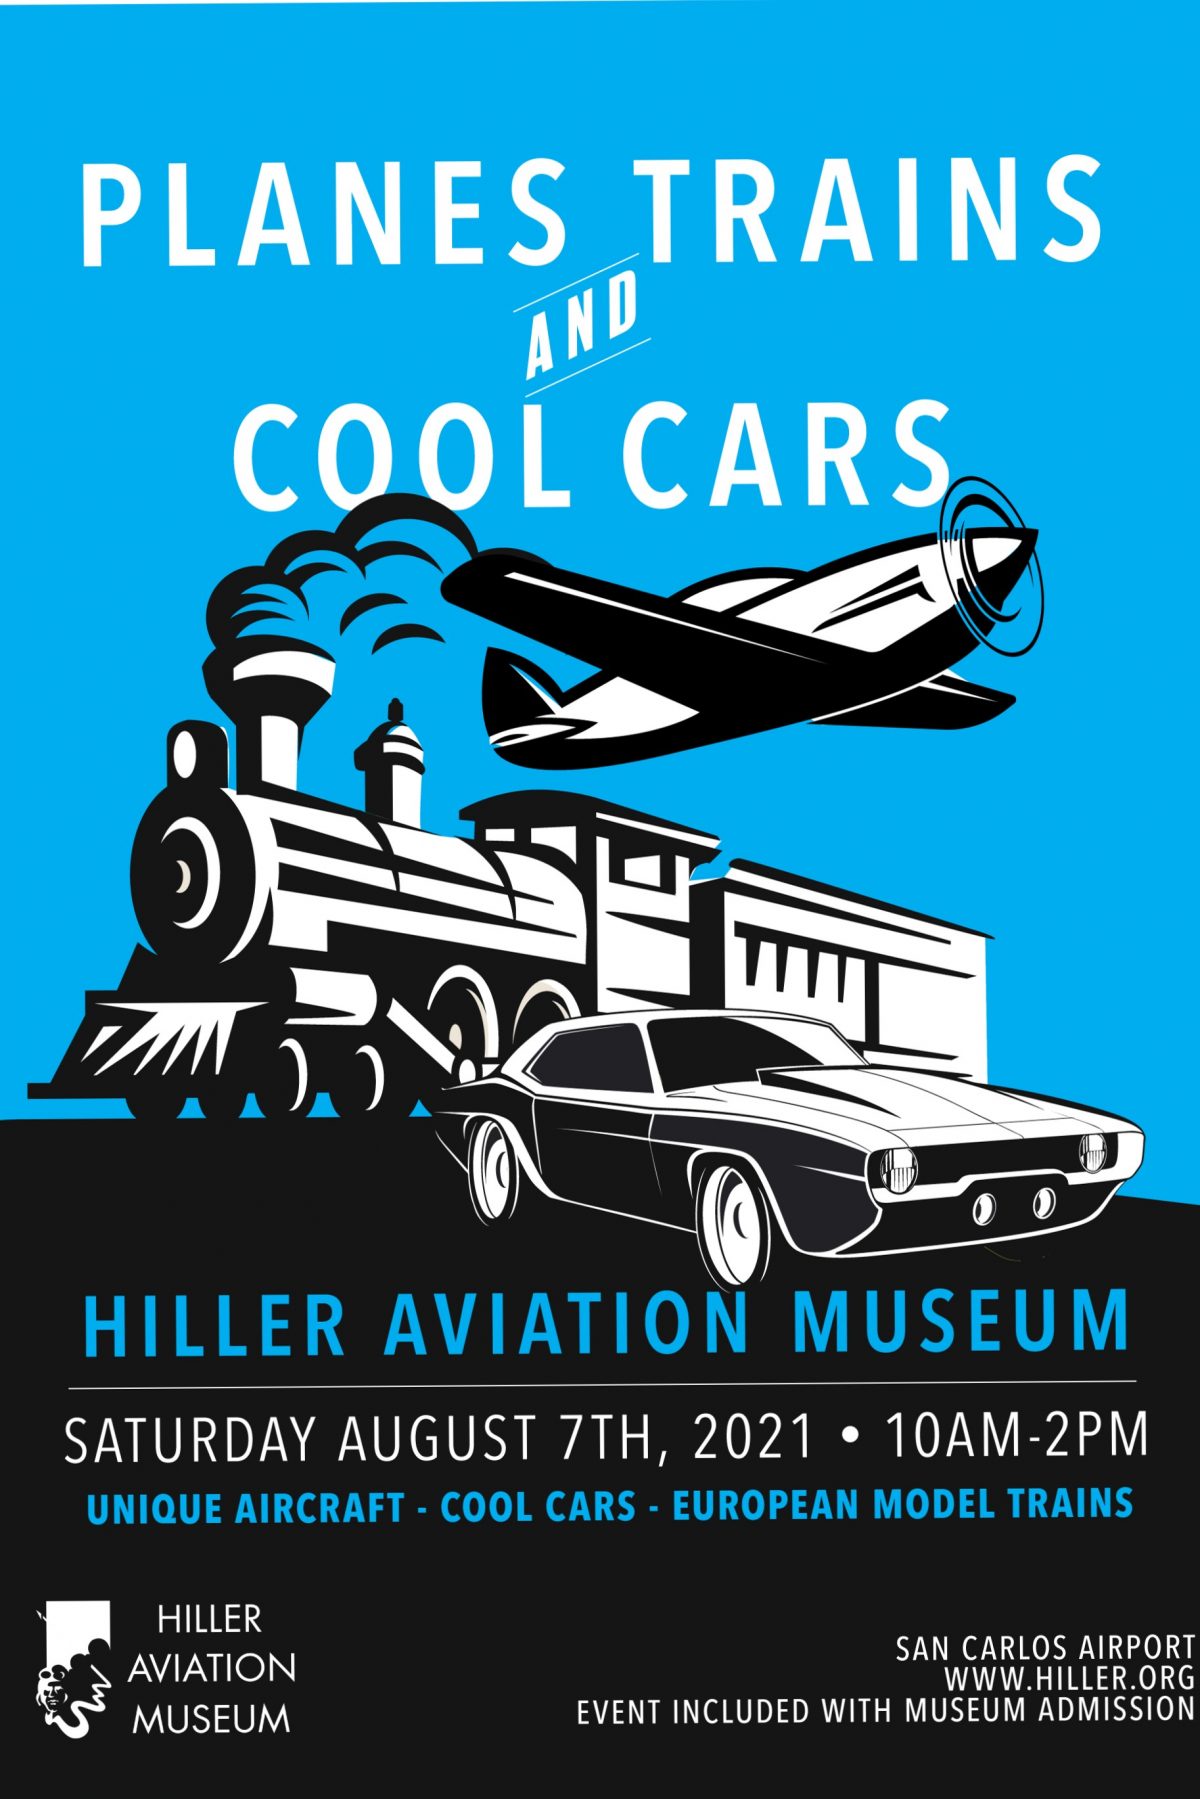 Planes, Trains, and Cool Cars